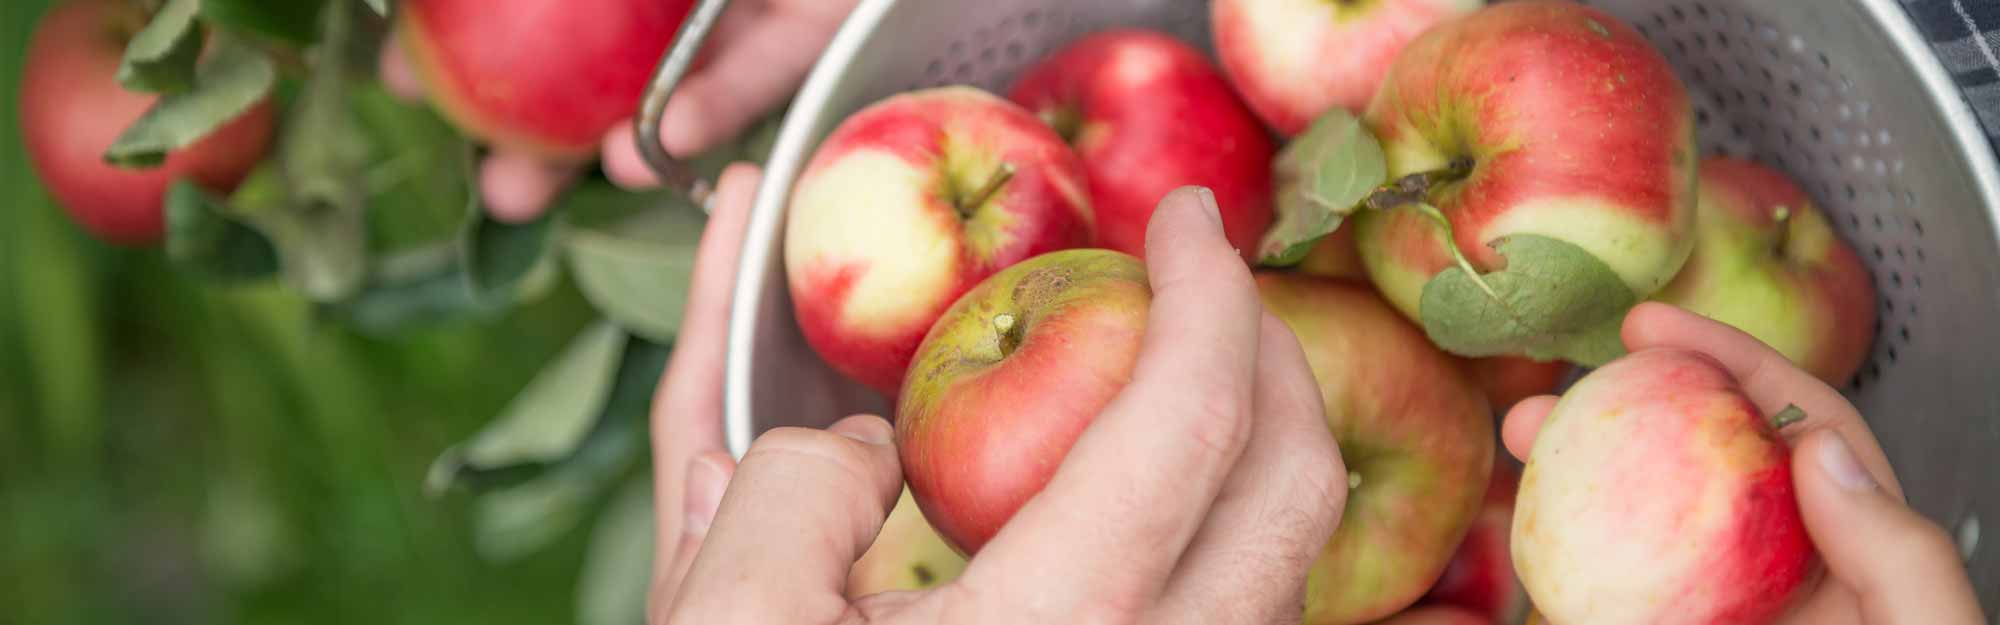 Hands picking red apples and putting them in a bucket